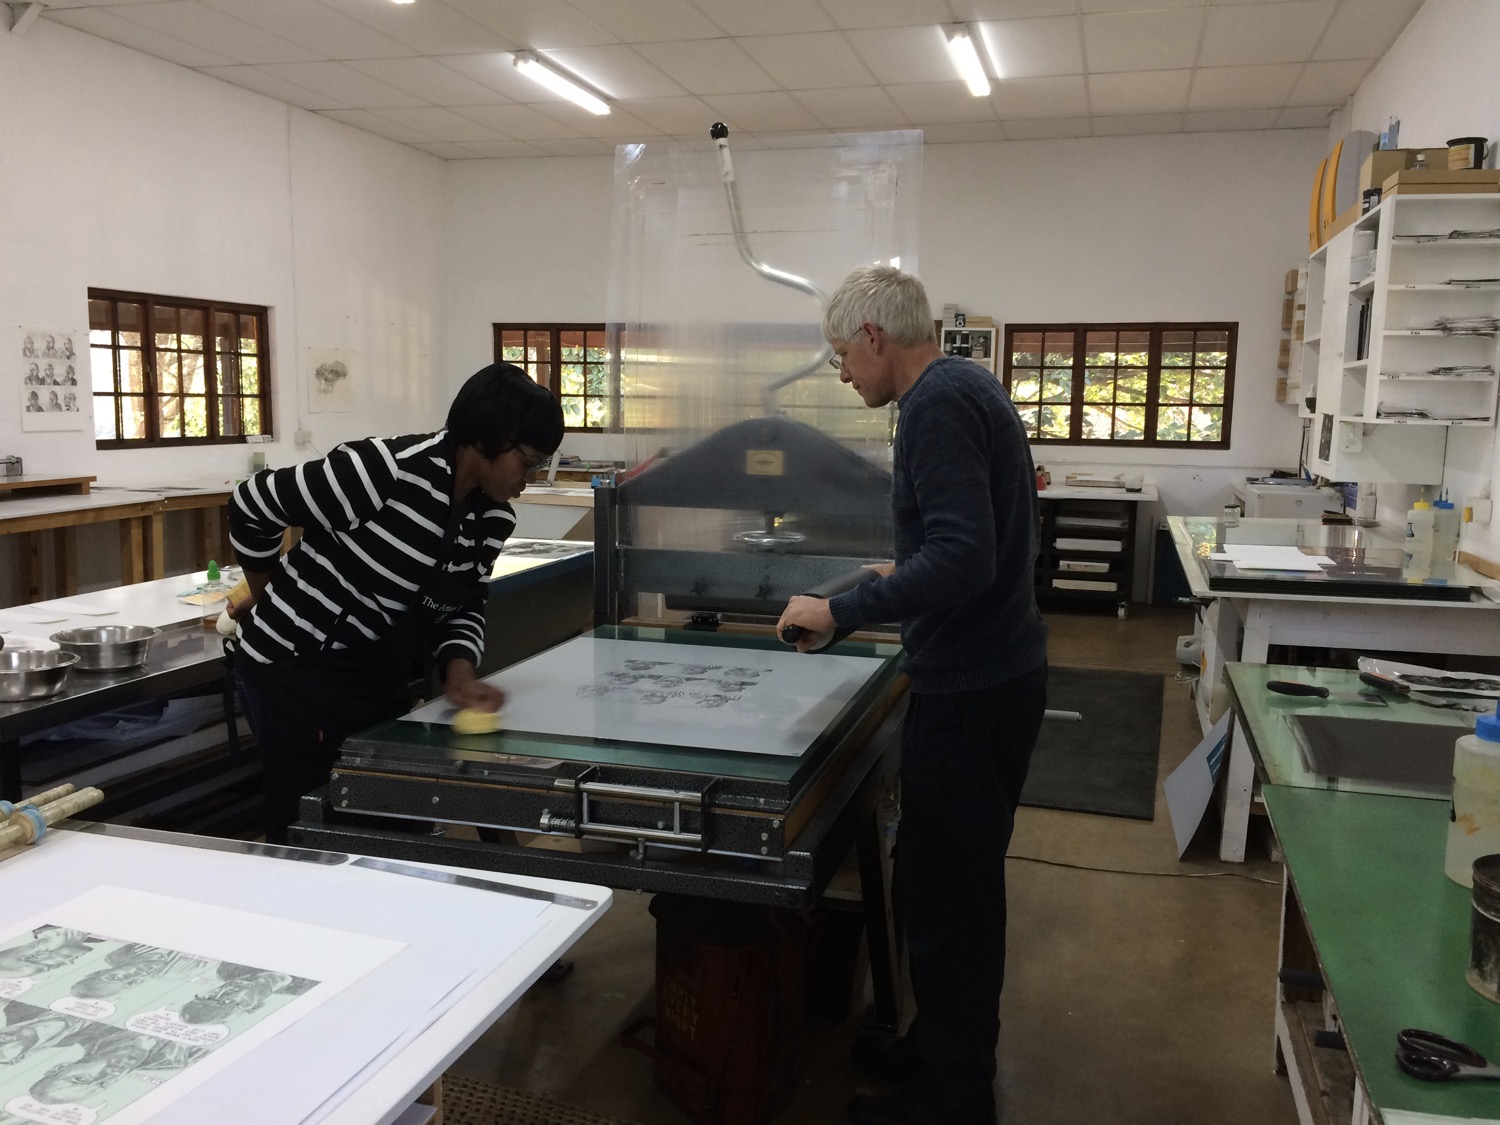 A brief introduction to the team at the The Artists' Press, who collectively make all of our prints possible.